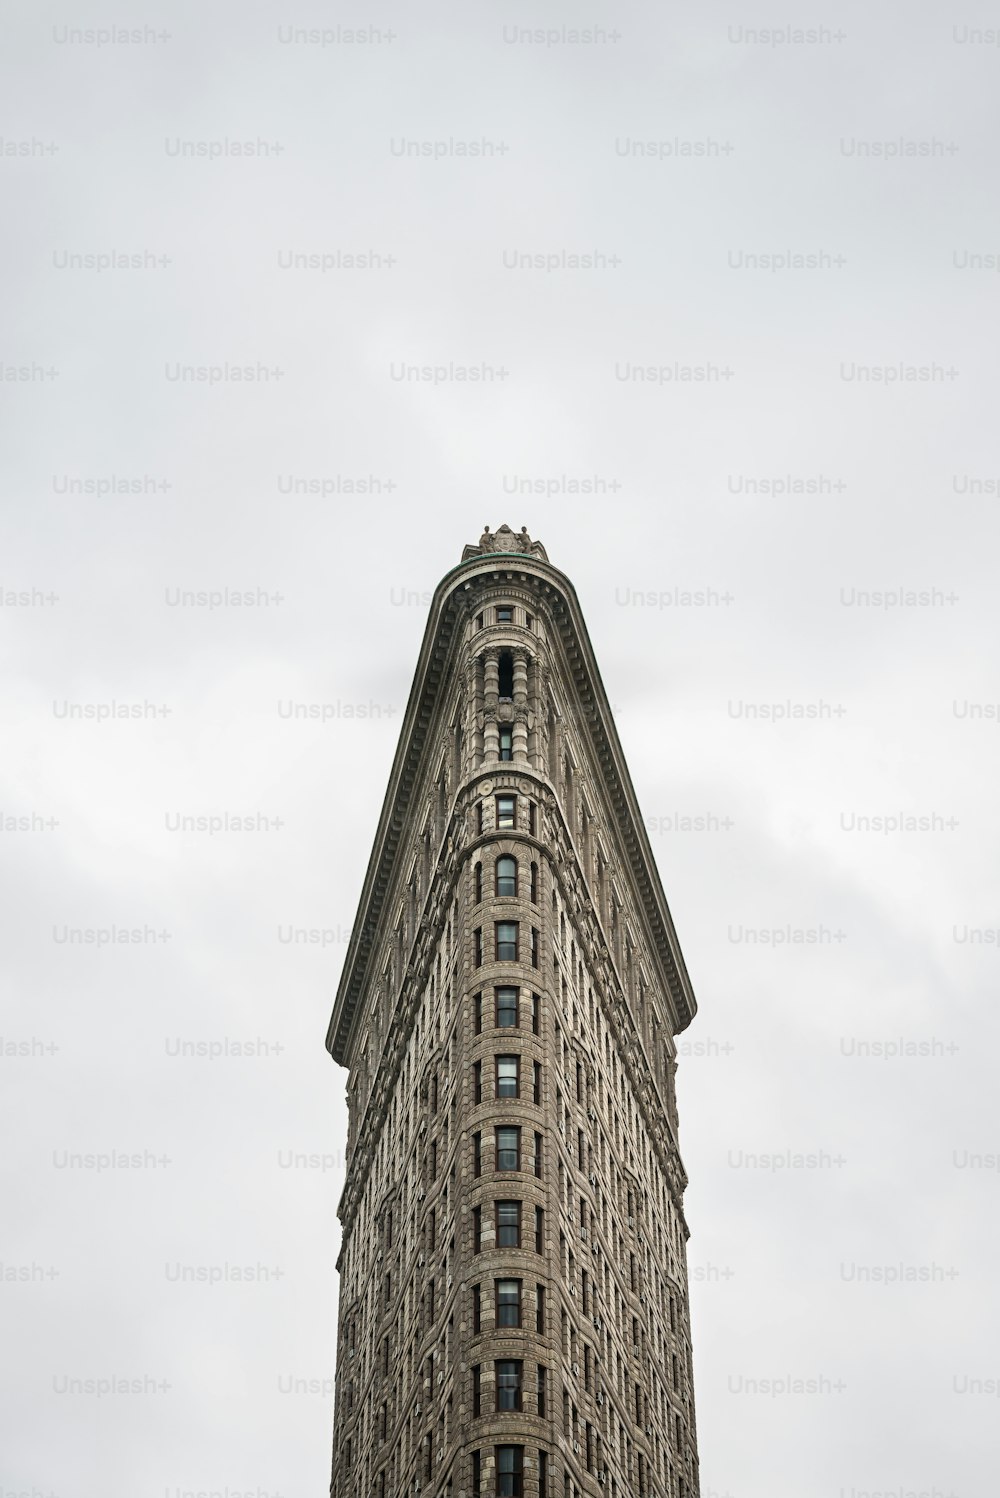 Front view of the Flatiron building in New York. Originally known as the Fuller Building, it was completed in 1902 under the design of Chicago's Daniel Burnham and at the time it became one of the tallest buildings in the city and one of only two skyscrapers north of 14th street.